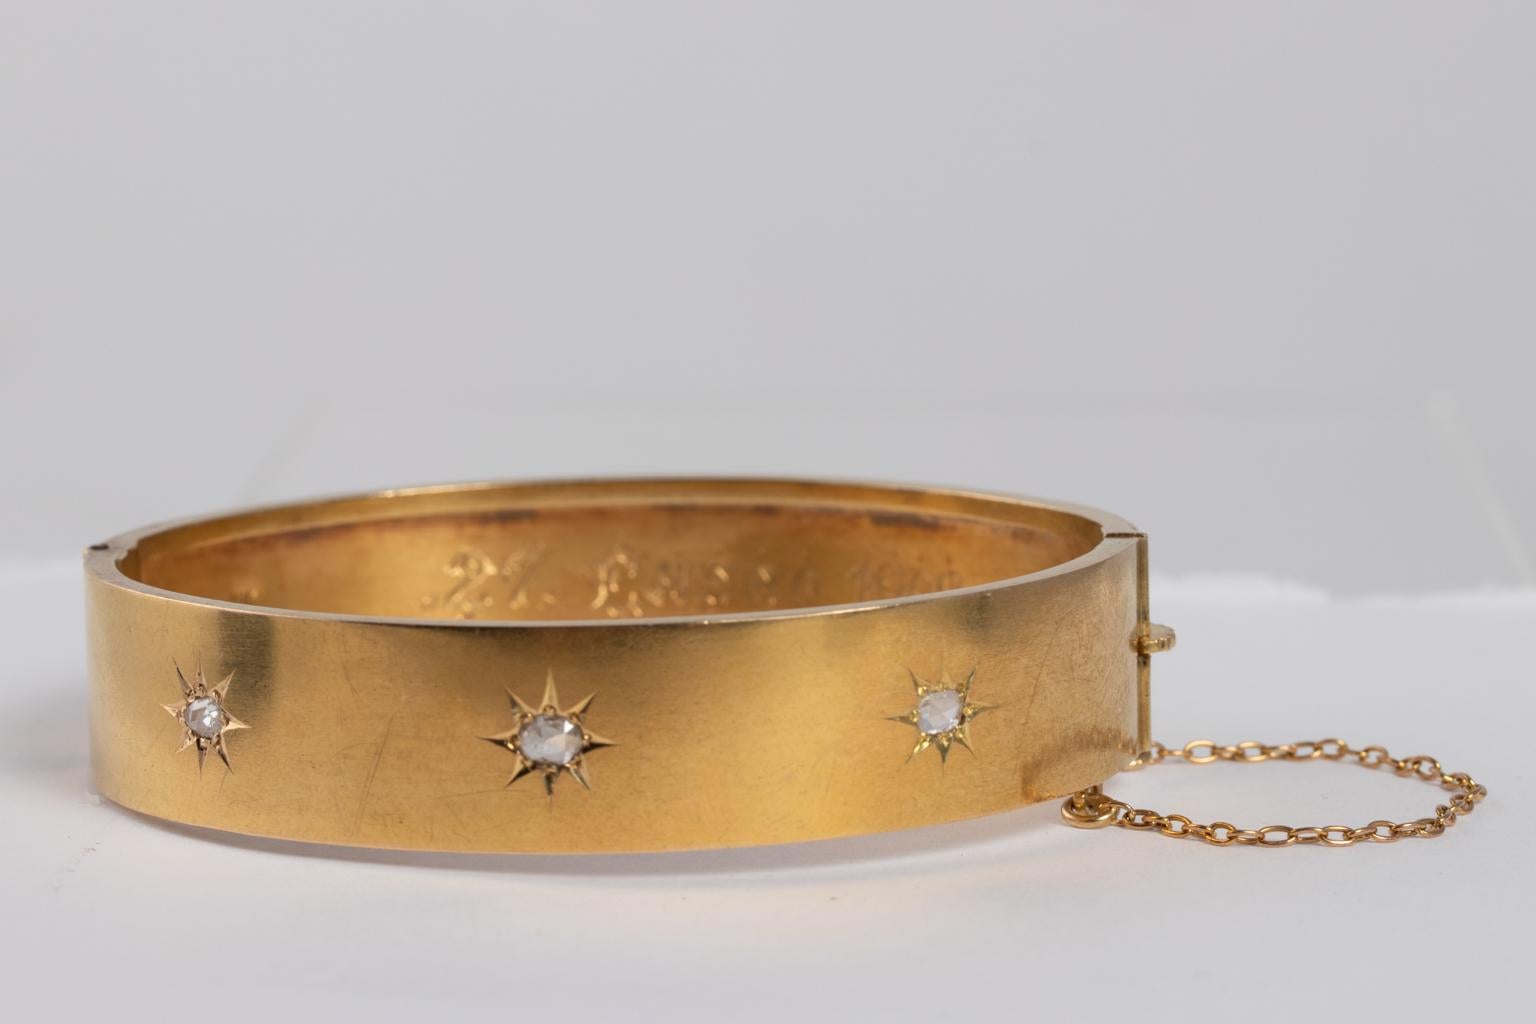 Circa 1900s late Victorian 18 karat bangle bracelet set with three rose cut diamonds in a star motif. It is hand inscribed with name and dated 1902 on the inside. The patina of the bracelet is a rich gold and features a safety chain built into the